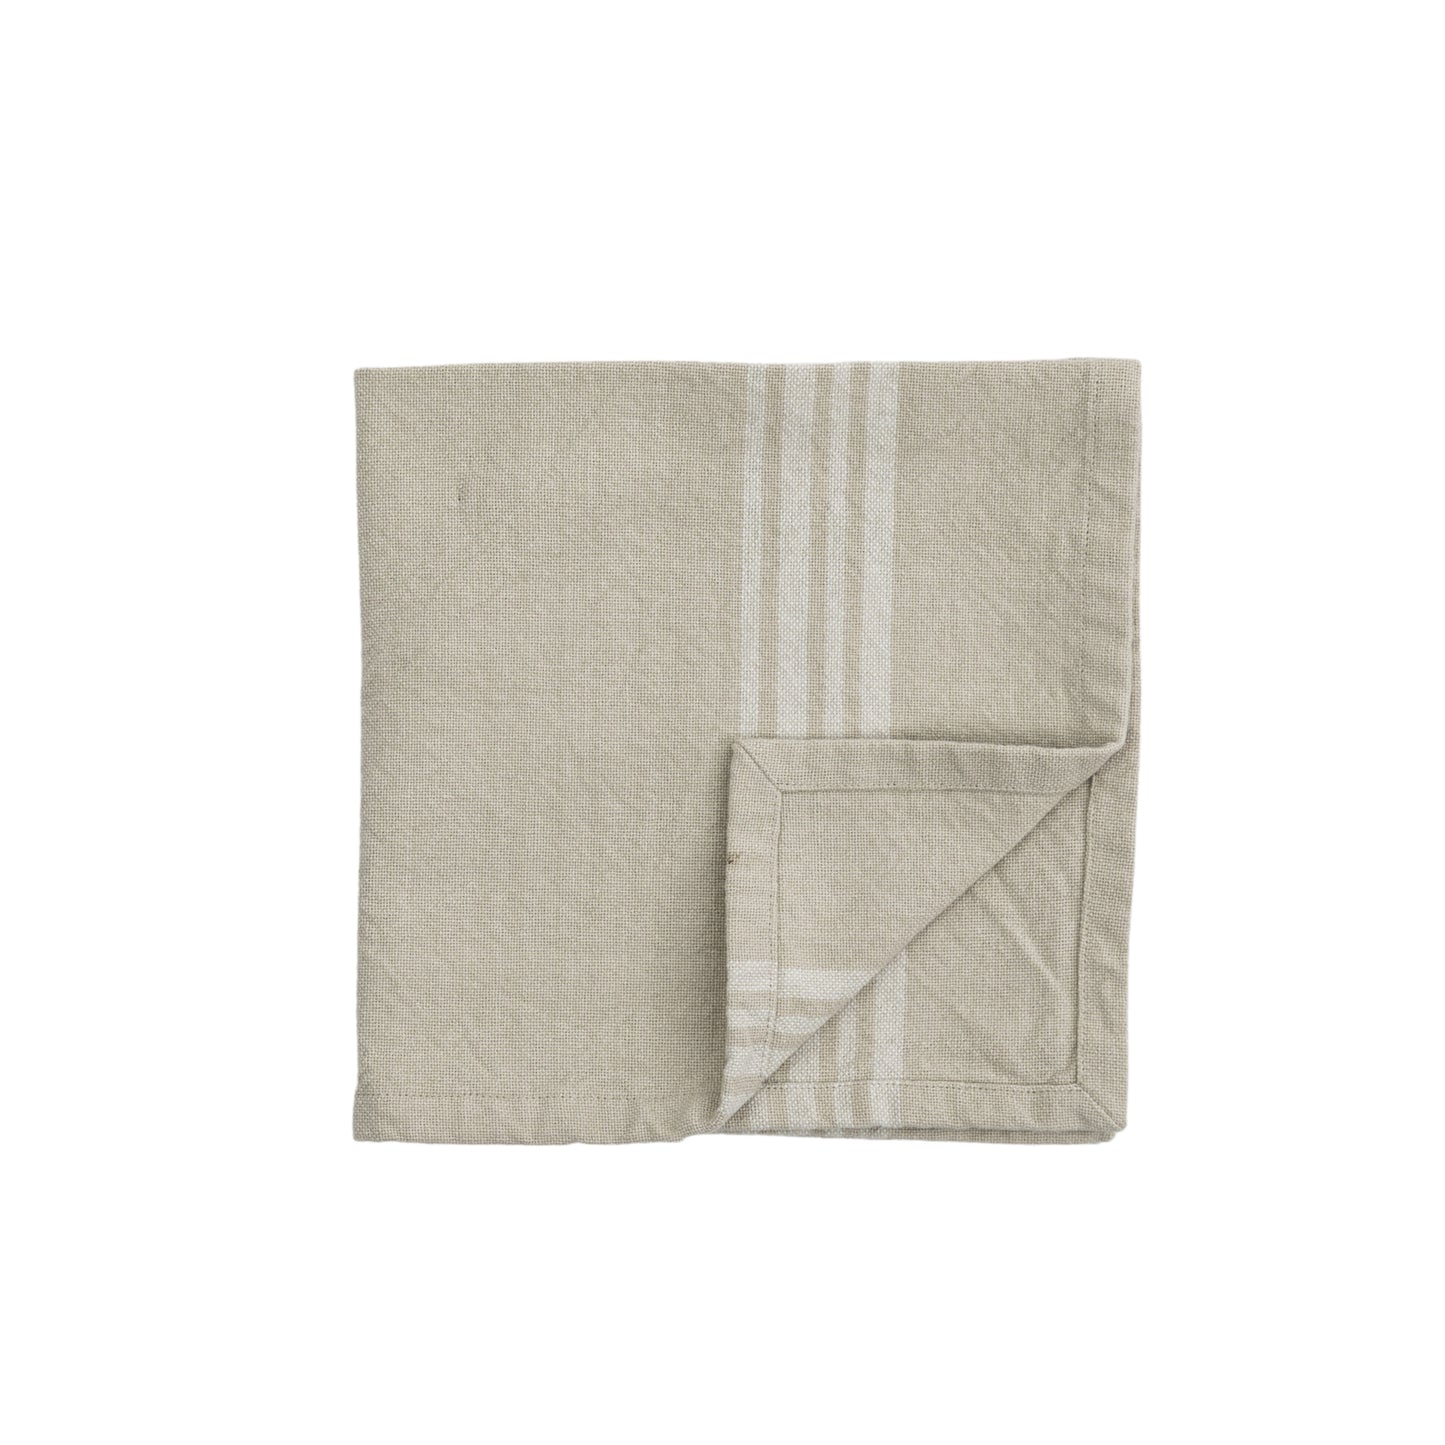 Load image into Gallery viewer, A Kikiathome.co.uk Stripe Napkin Natural 450x450mm (4pk) folded on top of a white background, enhancing interior decor.
